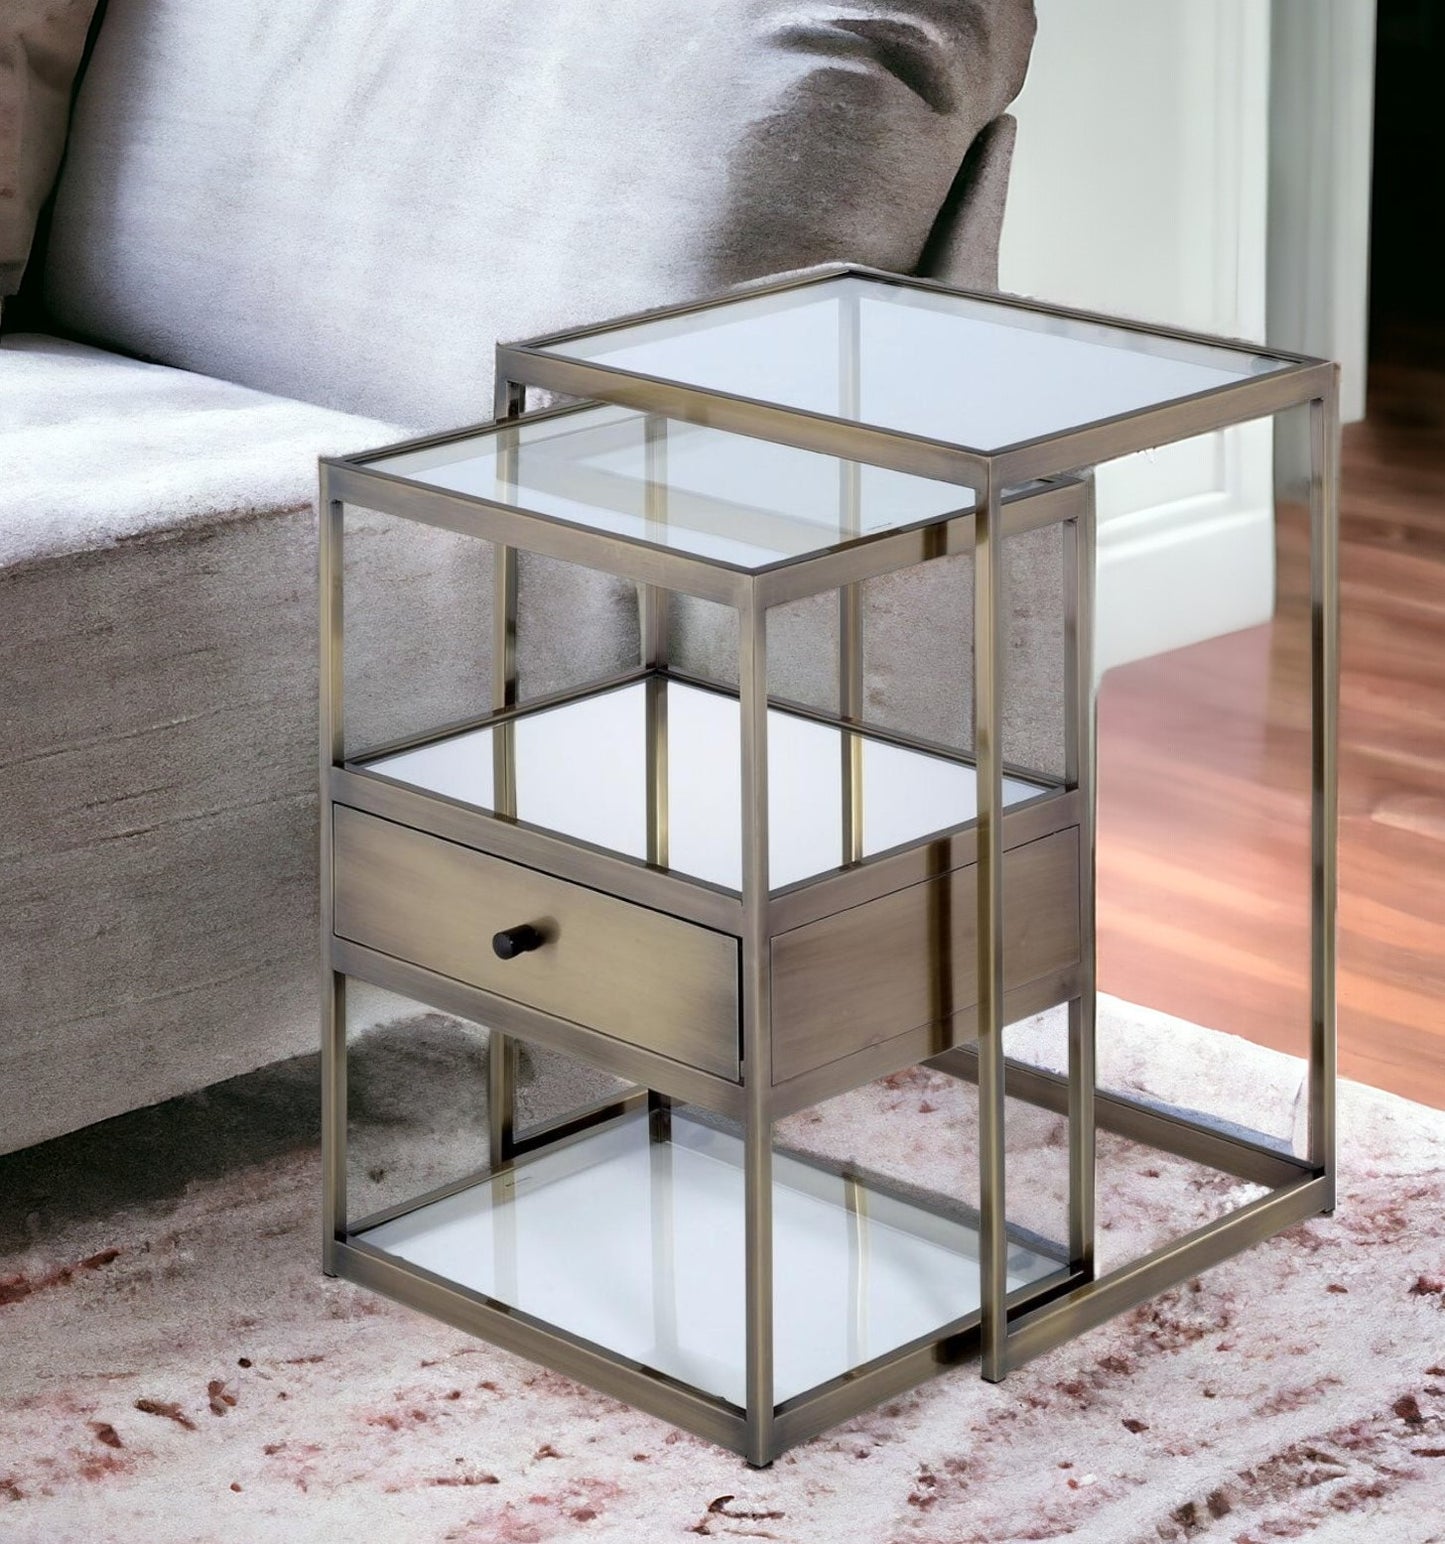 26" Antique Brass And Clear Glass End Table With Two Shelves With Magazine Holder